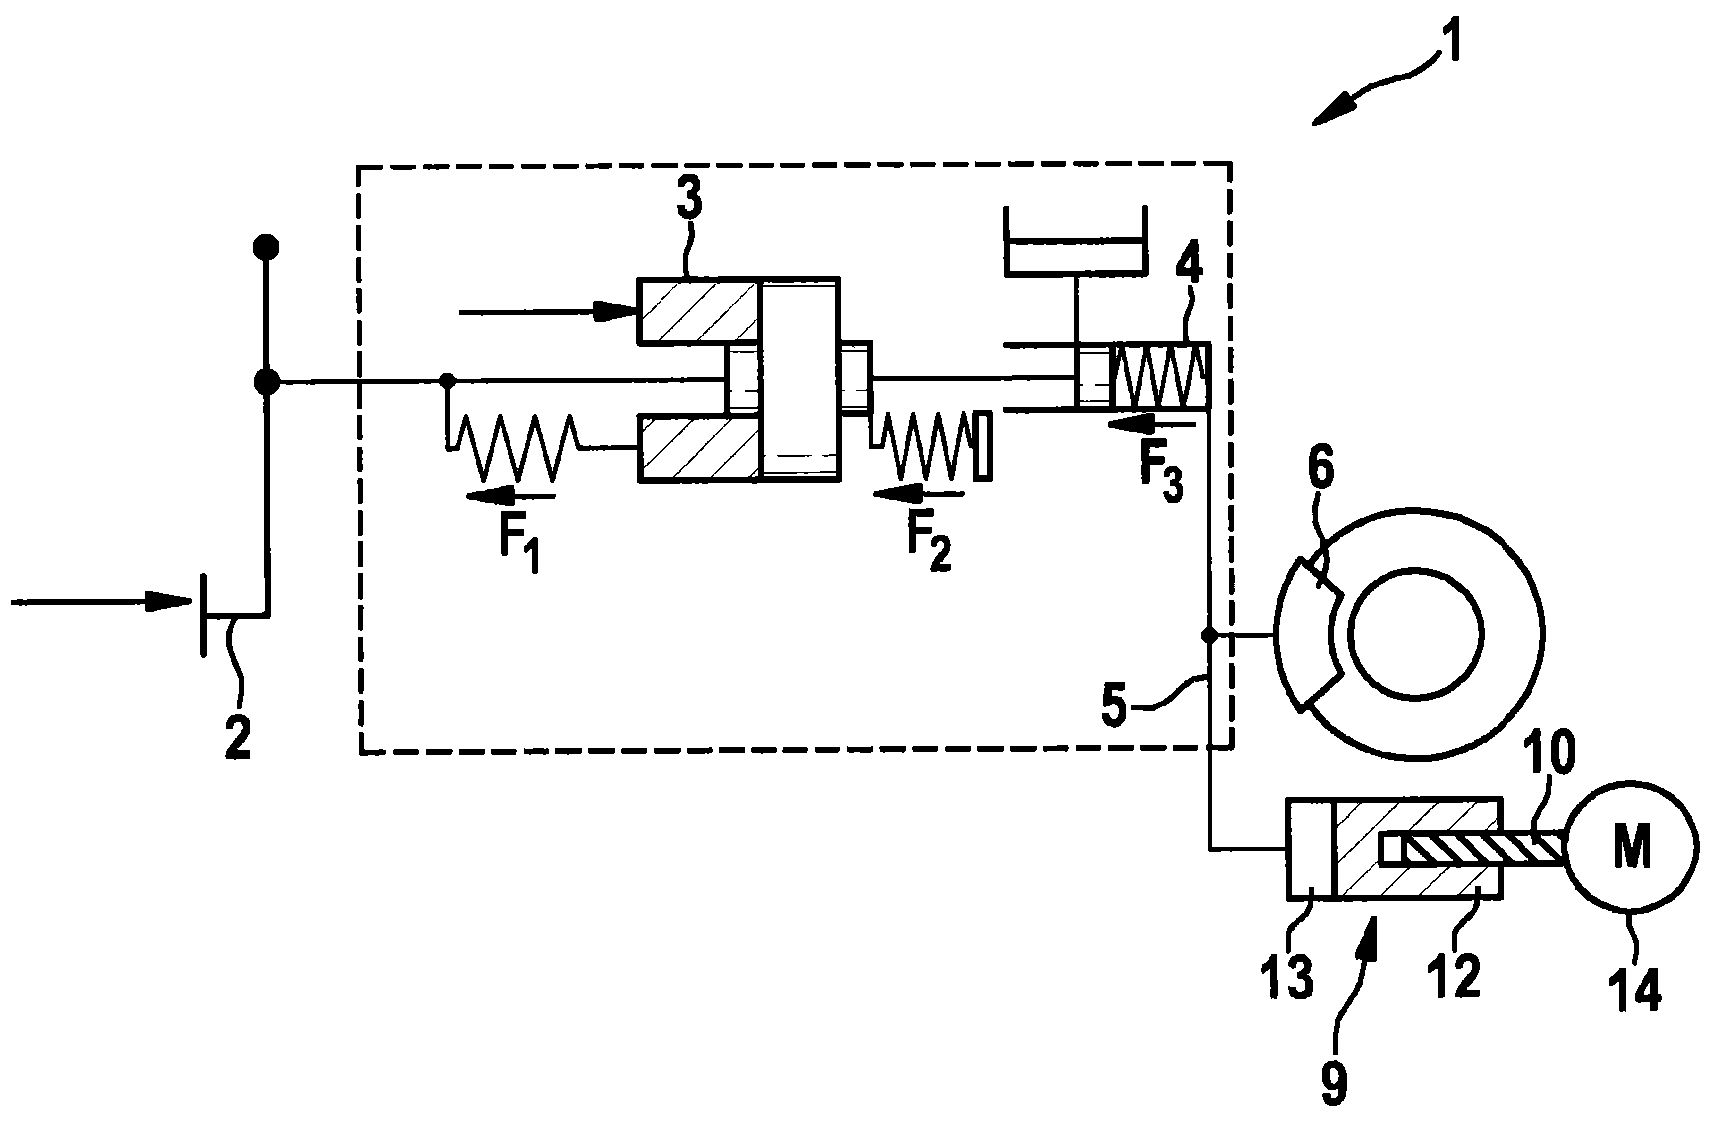 Compensation device for a brake system, and brake system having a compensation device of this type